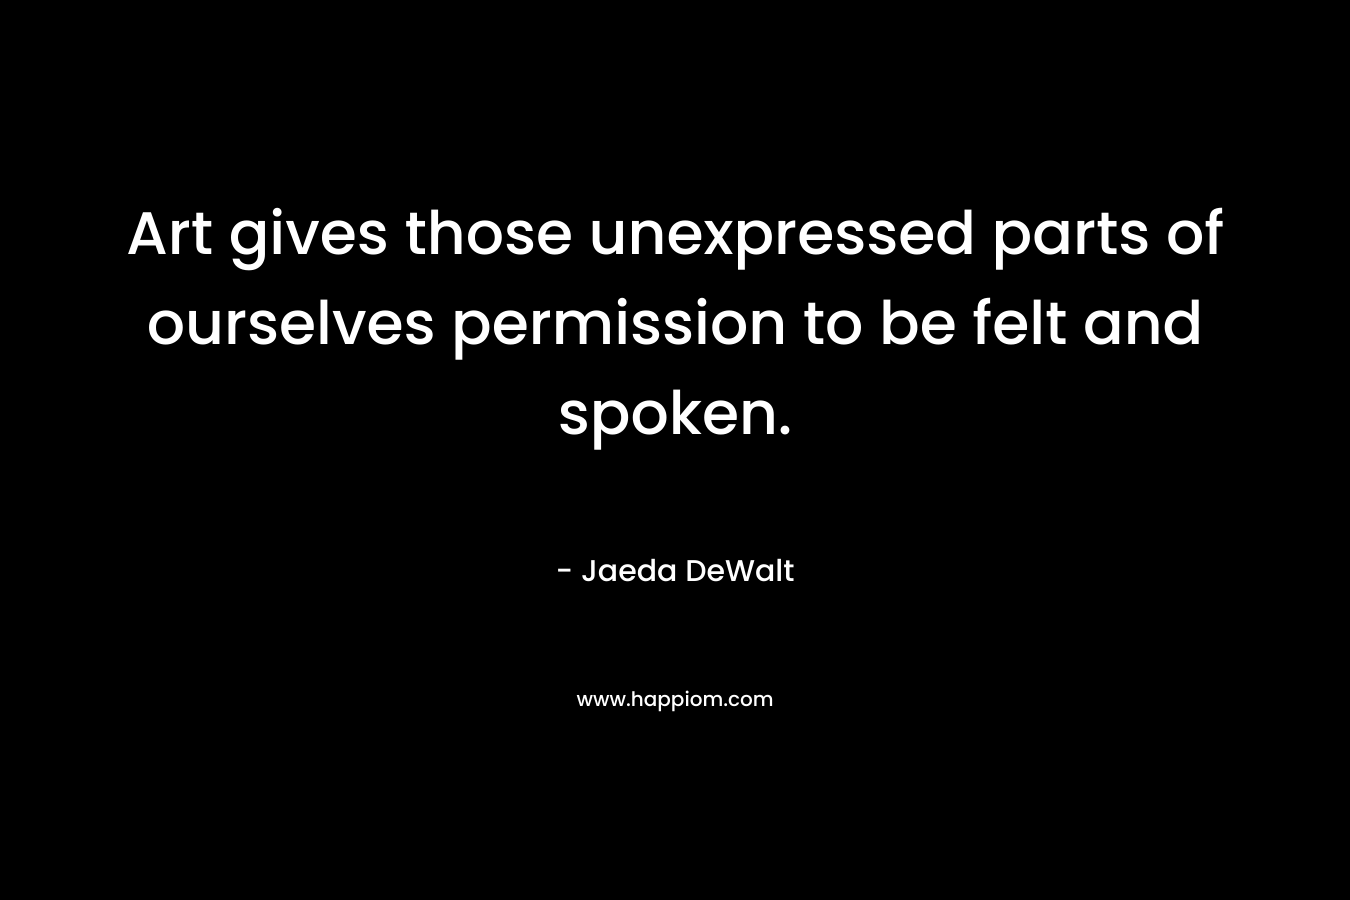 Art gives those unexpressed parts of ourselves permission to be felt and spoken. – Jaeda DeWalt